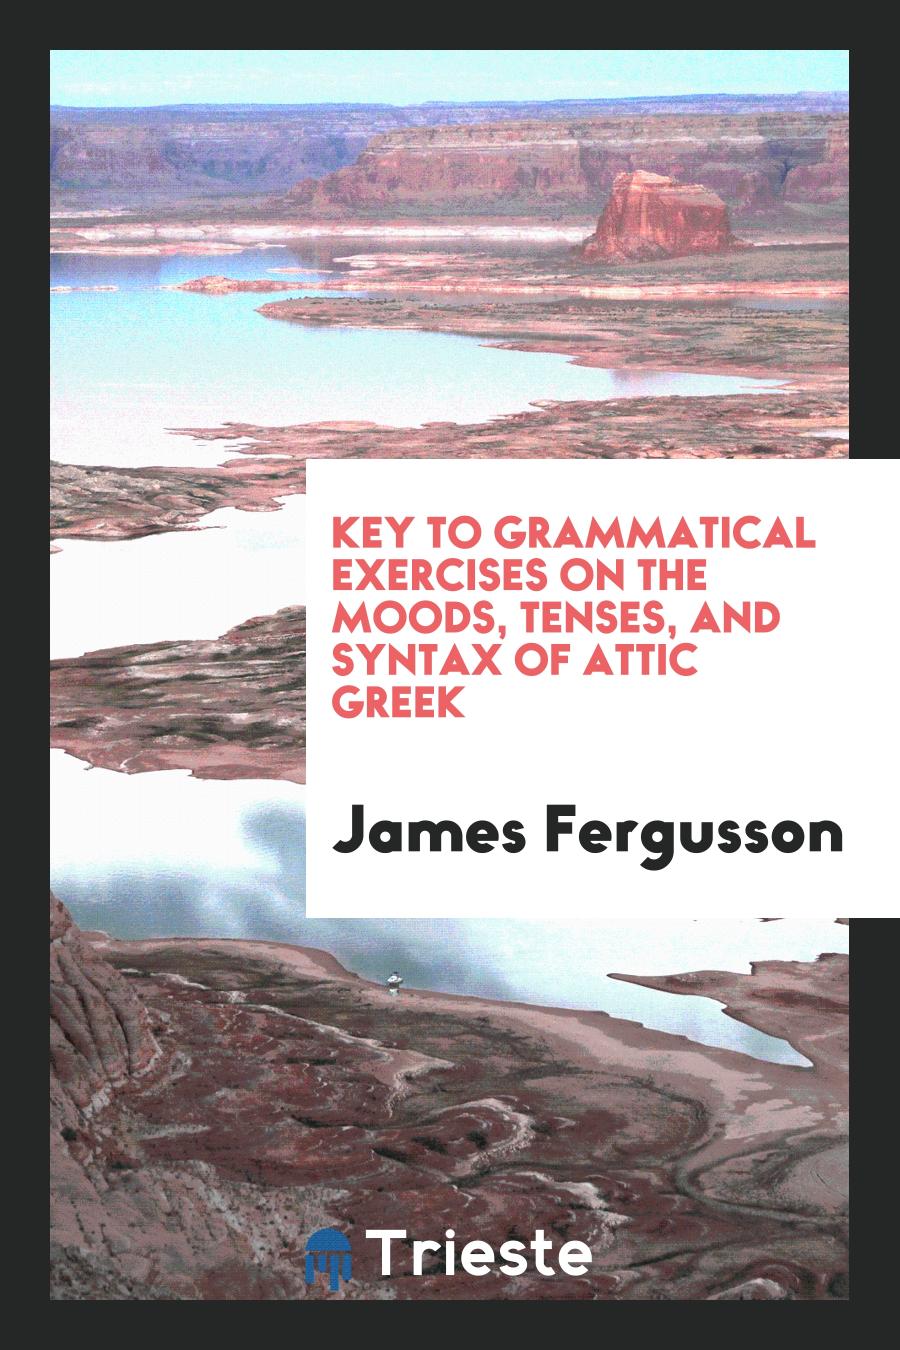 Key to Grammatical exercises on the moods, tenses, and syntax of Attic Greek